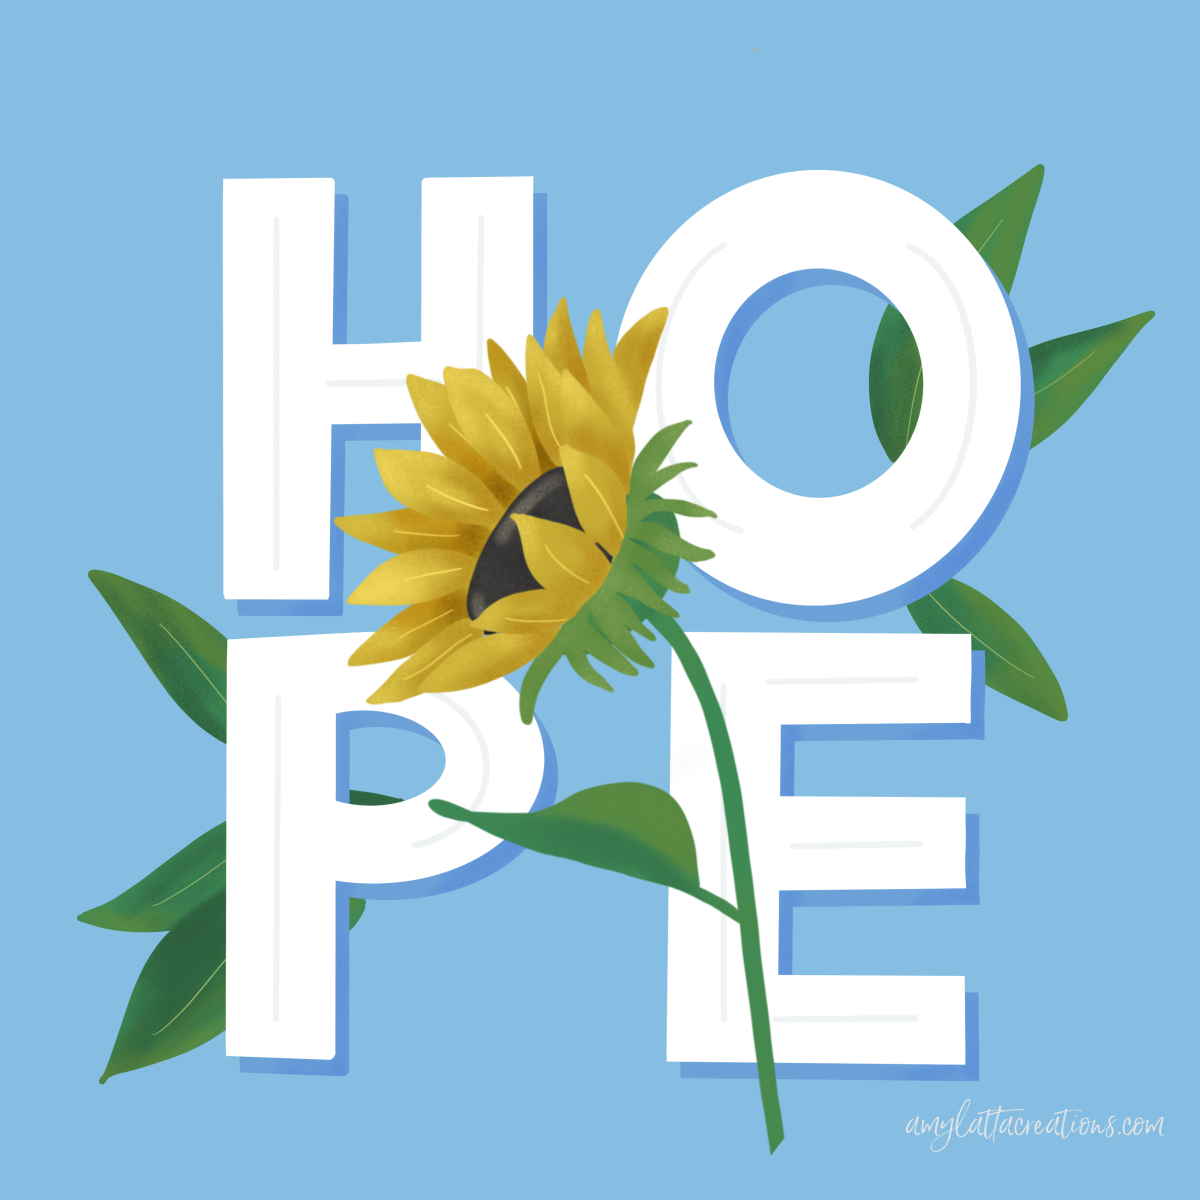 Image contains the word HOPE in white letters on a blue background with a sunflower and green leaves.